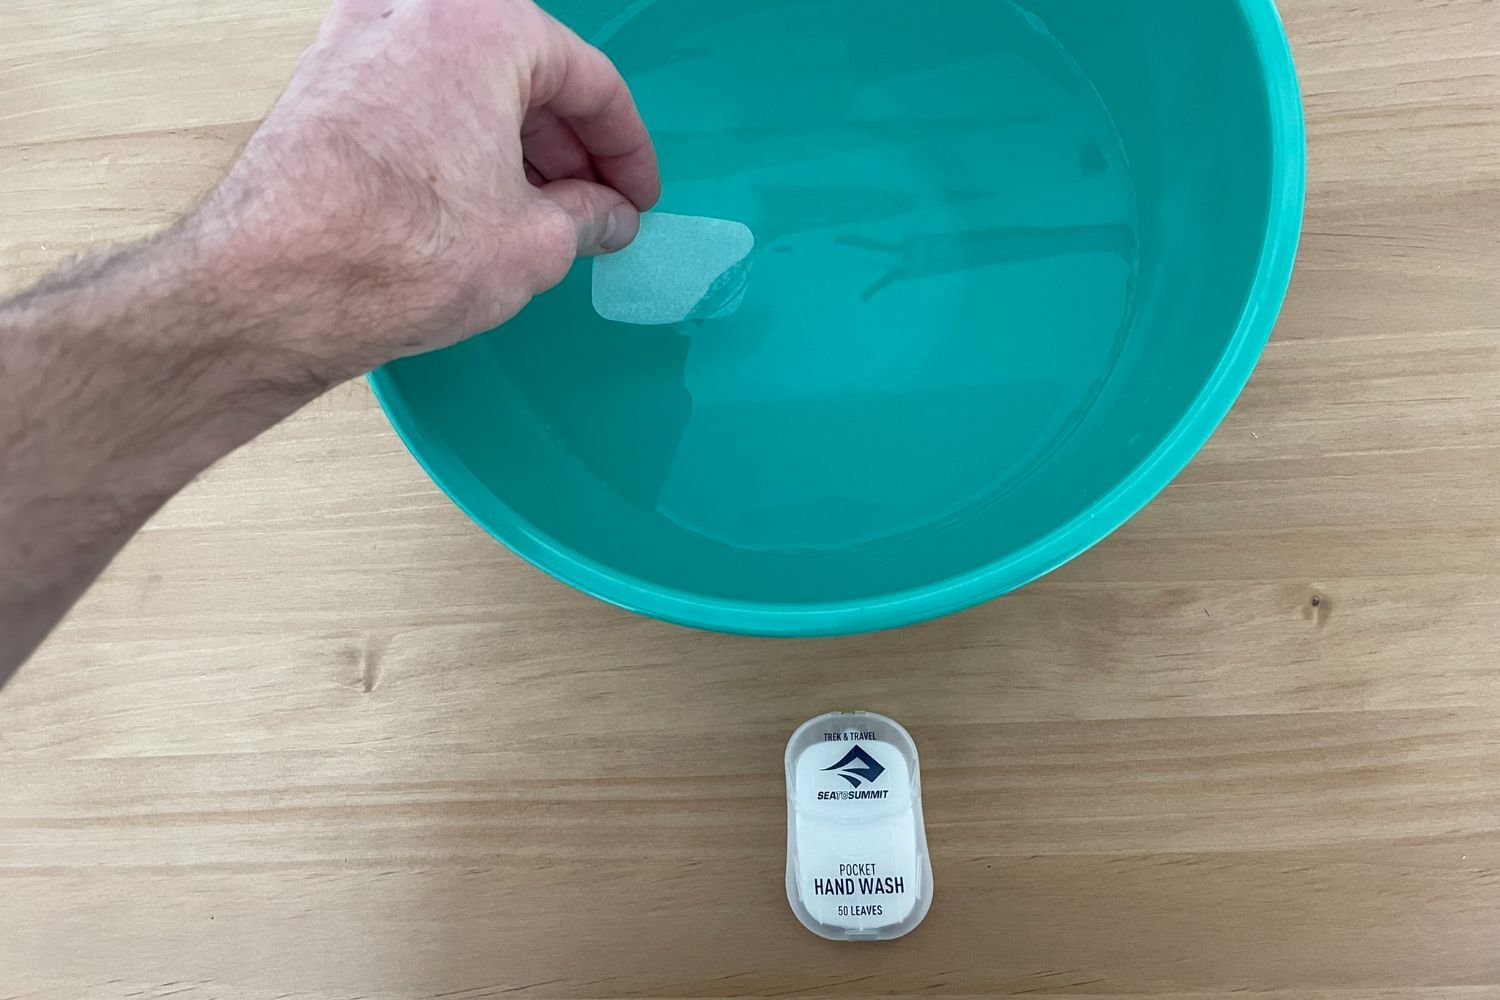  They don’t look like much, but the Sea To Summit Trek &amp; Travel Pocket Hand Soap sheets were a top performer for removing dirt and grime from hands. 